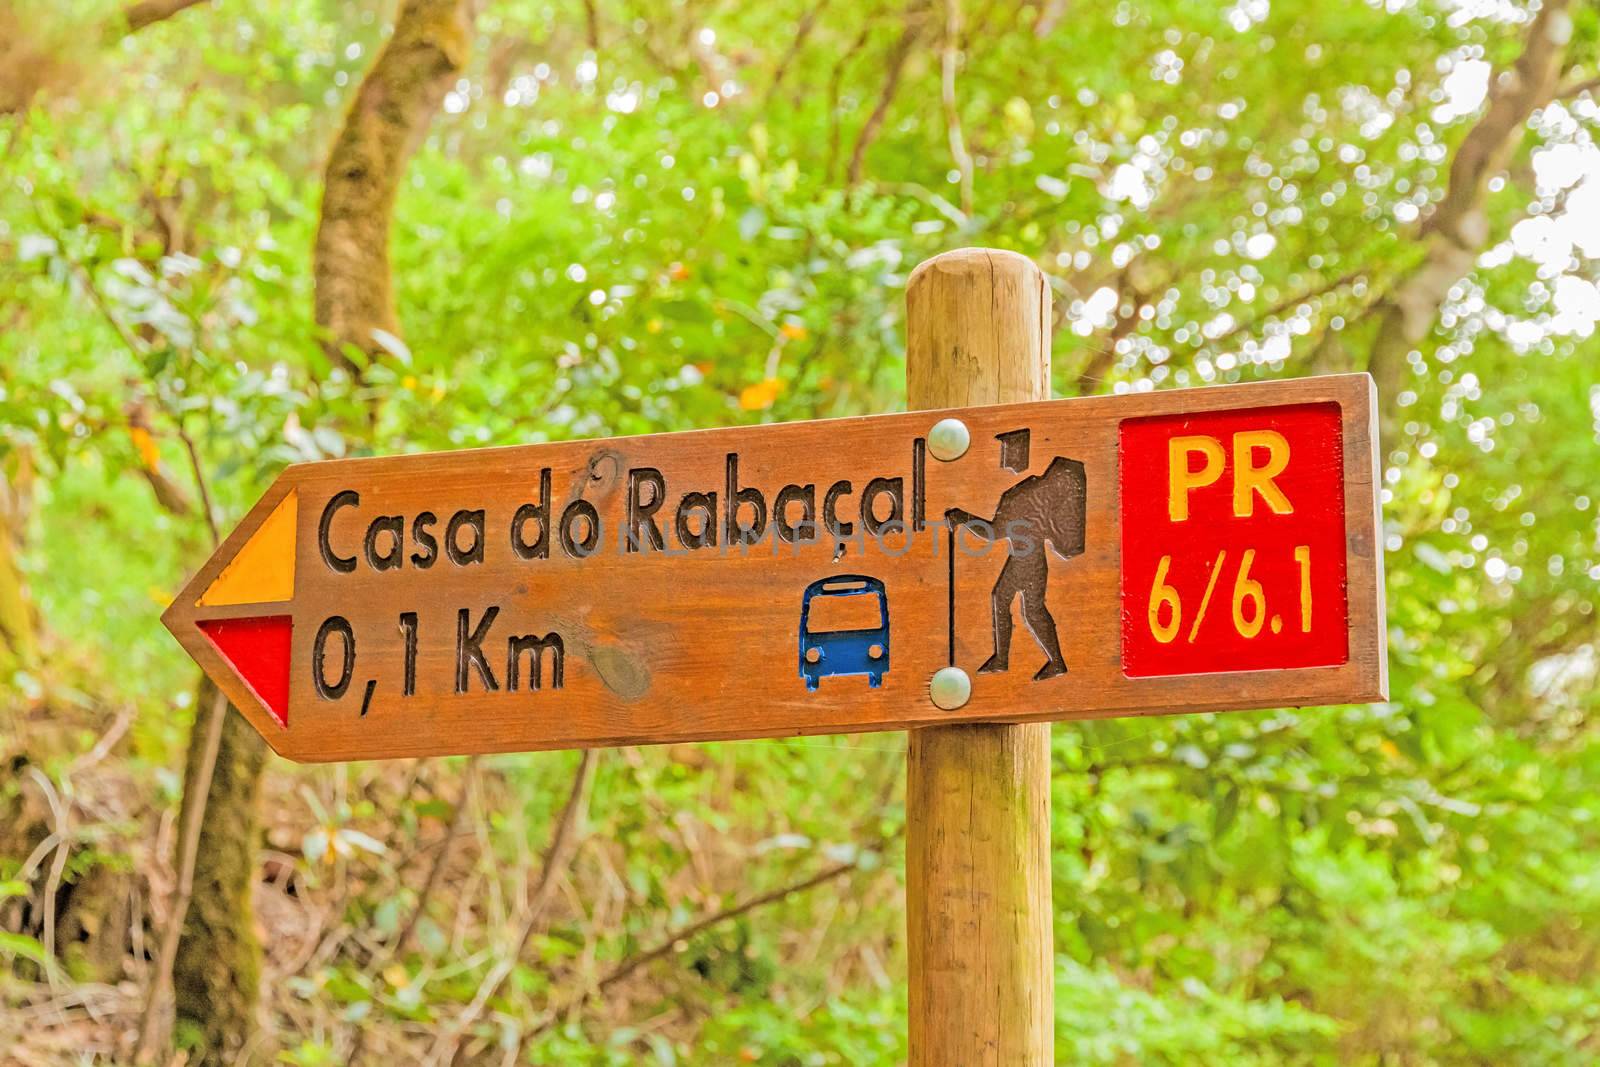 Signpost showing the way to Casa do Rabacal, a famous walk trail for hikers on island of Madeira.